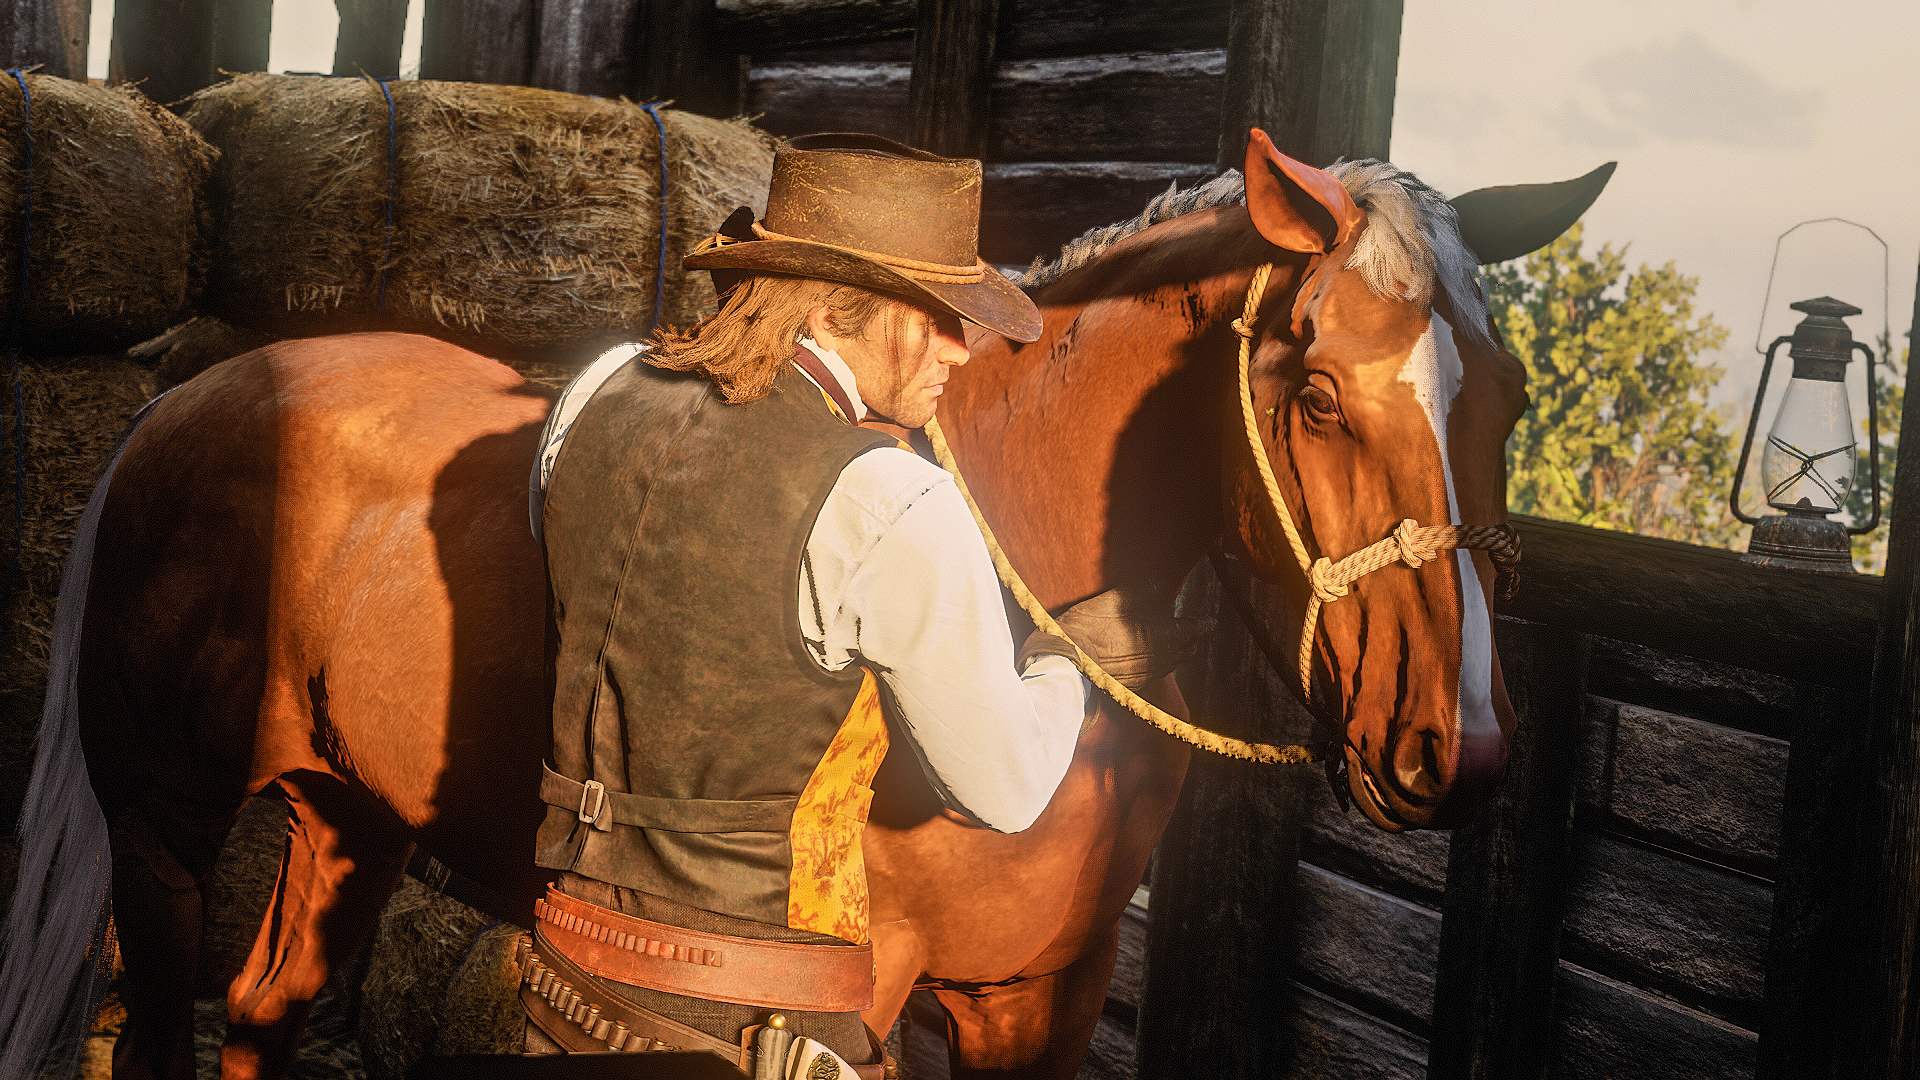 General 1920x1080 Red Dead Redemption 2 video game art video games sunlight hat video game characters Arthur Morgan animals horse riding horse farm depth of field CGI Rockstar Games horse cowboy hats lamp